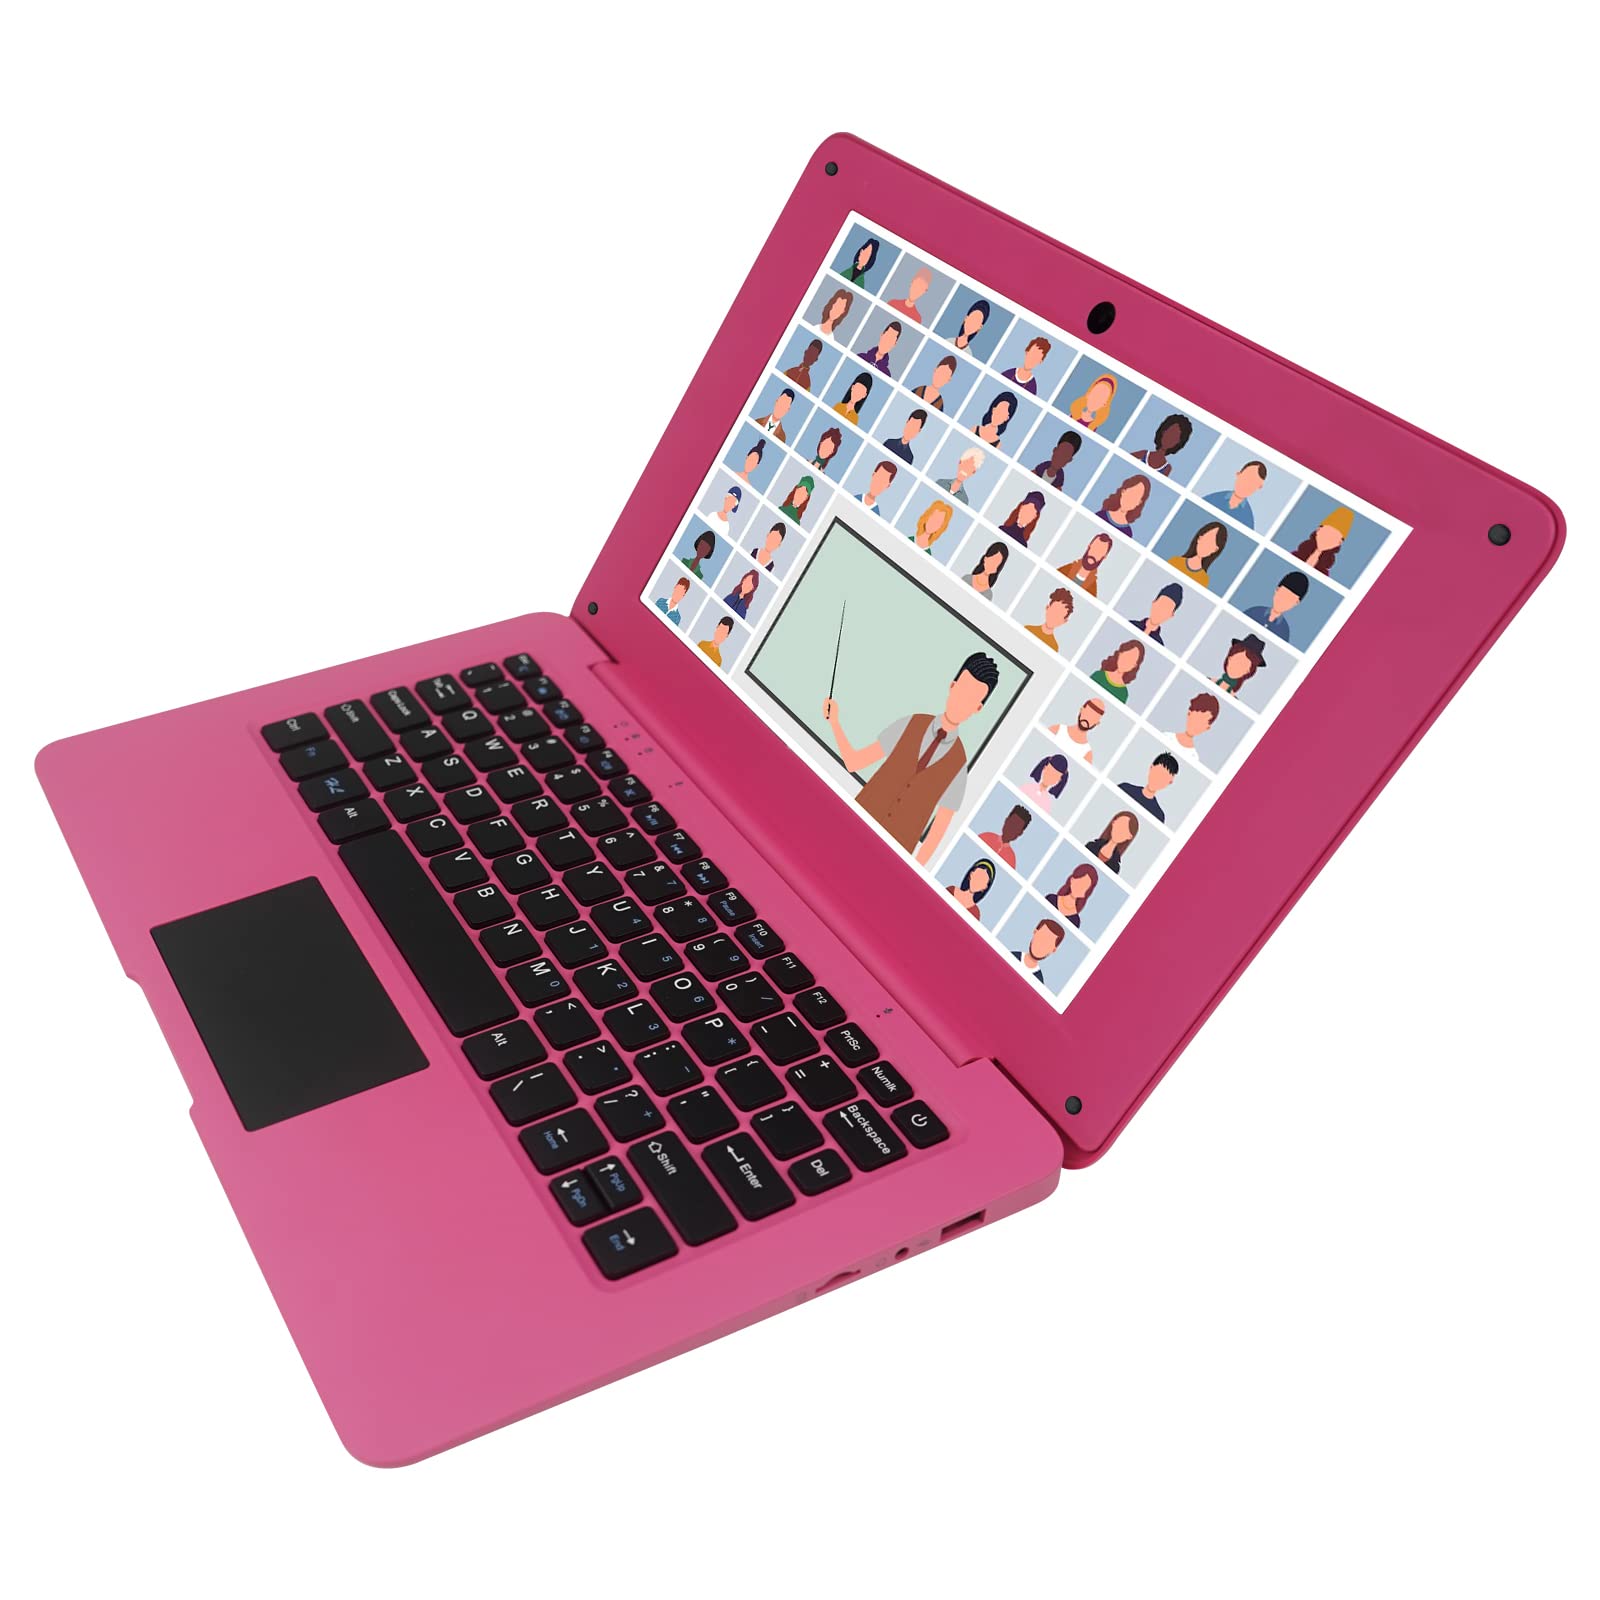 EVRAIN 10.1inch Android Netbook, Portable Laptop with A133P CPU, 2GB RAM 64GB ROM 800x1280 IPS Screen (Pink)